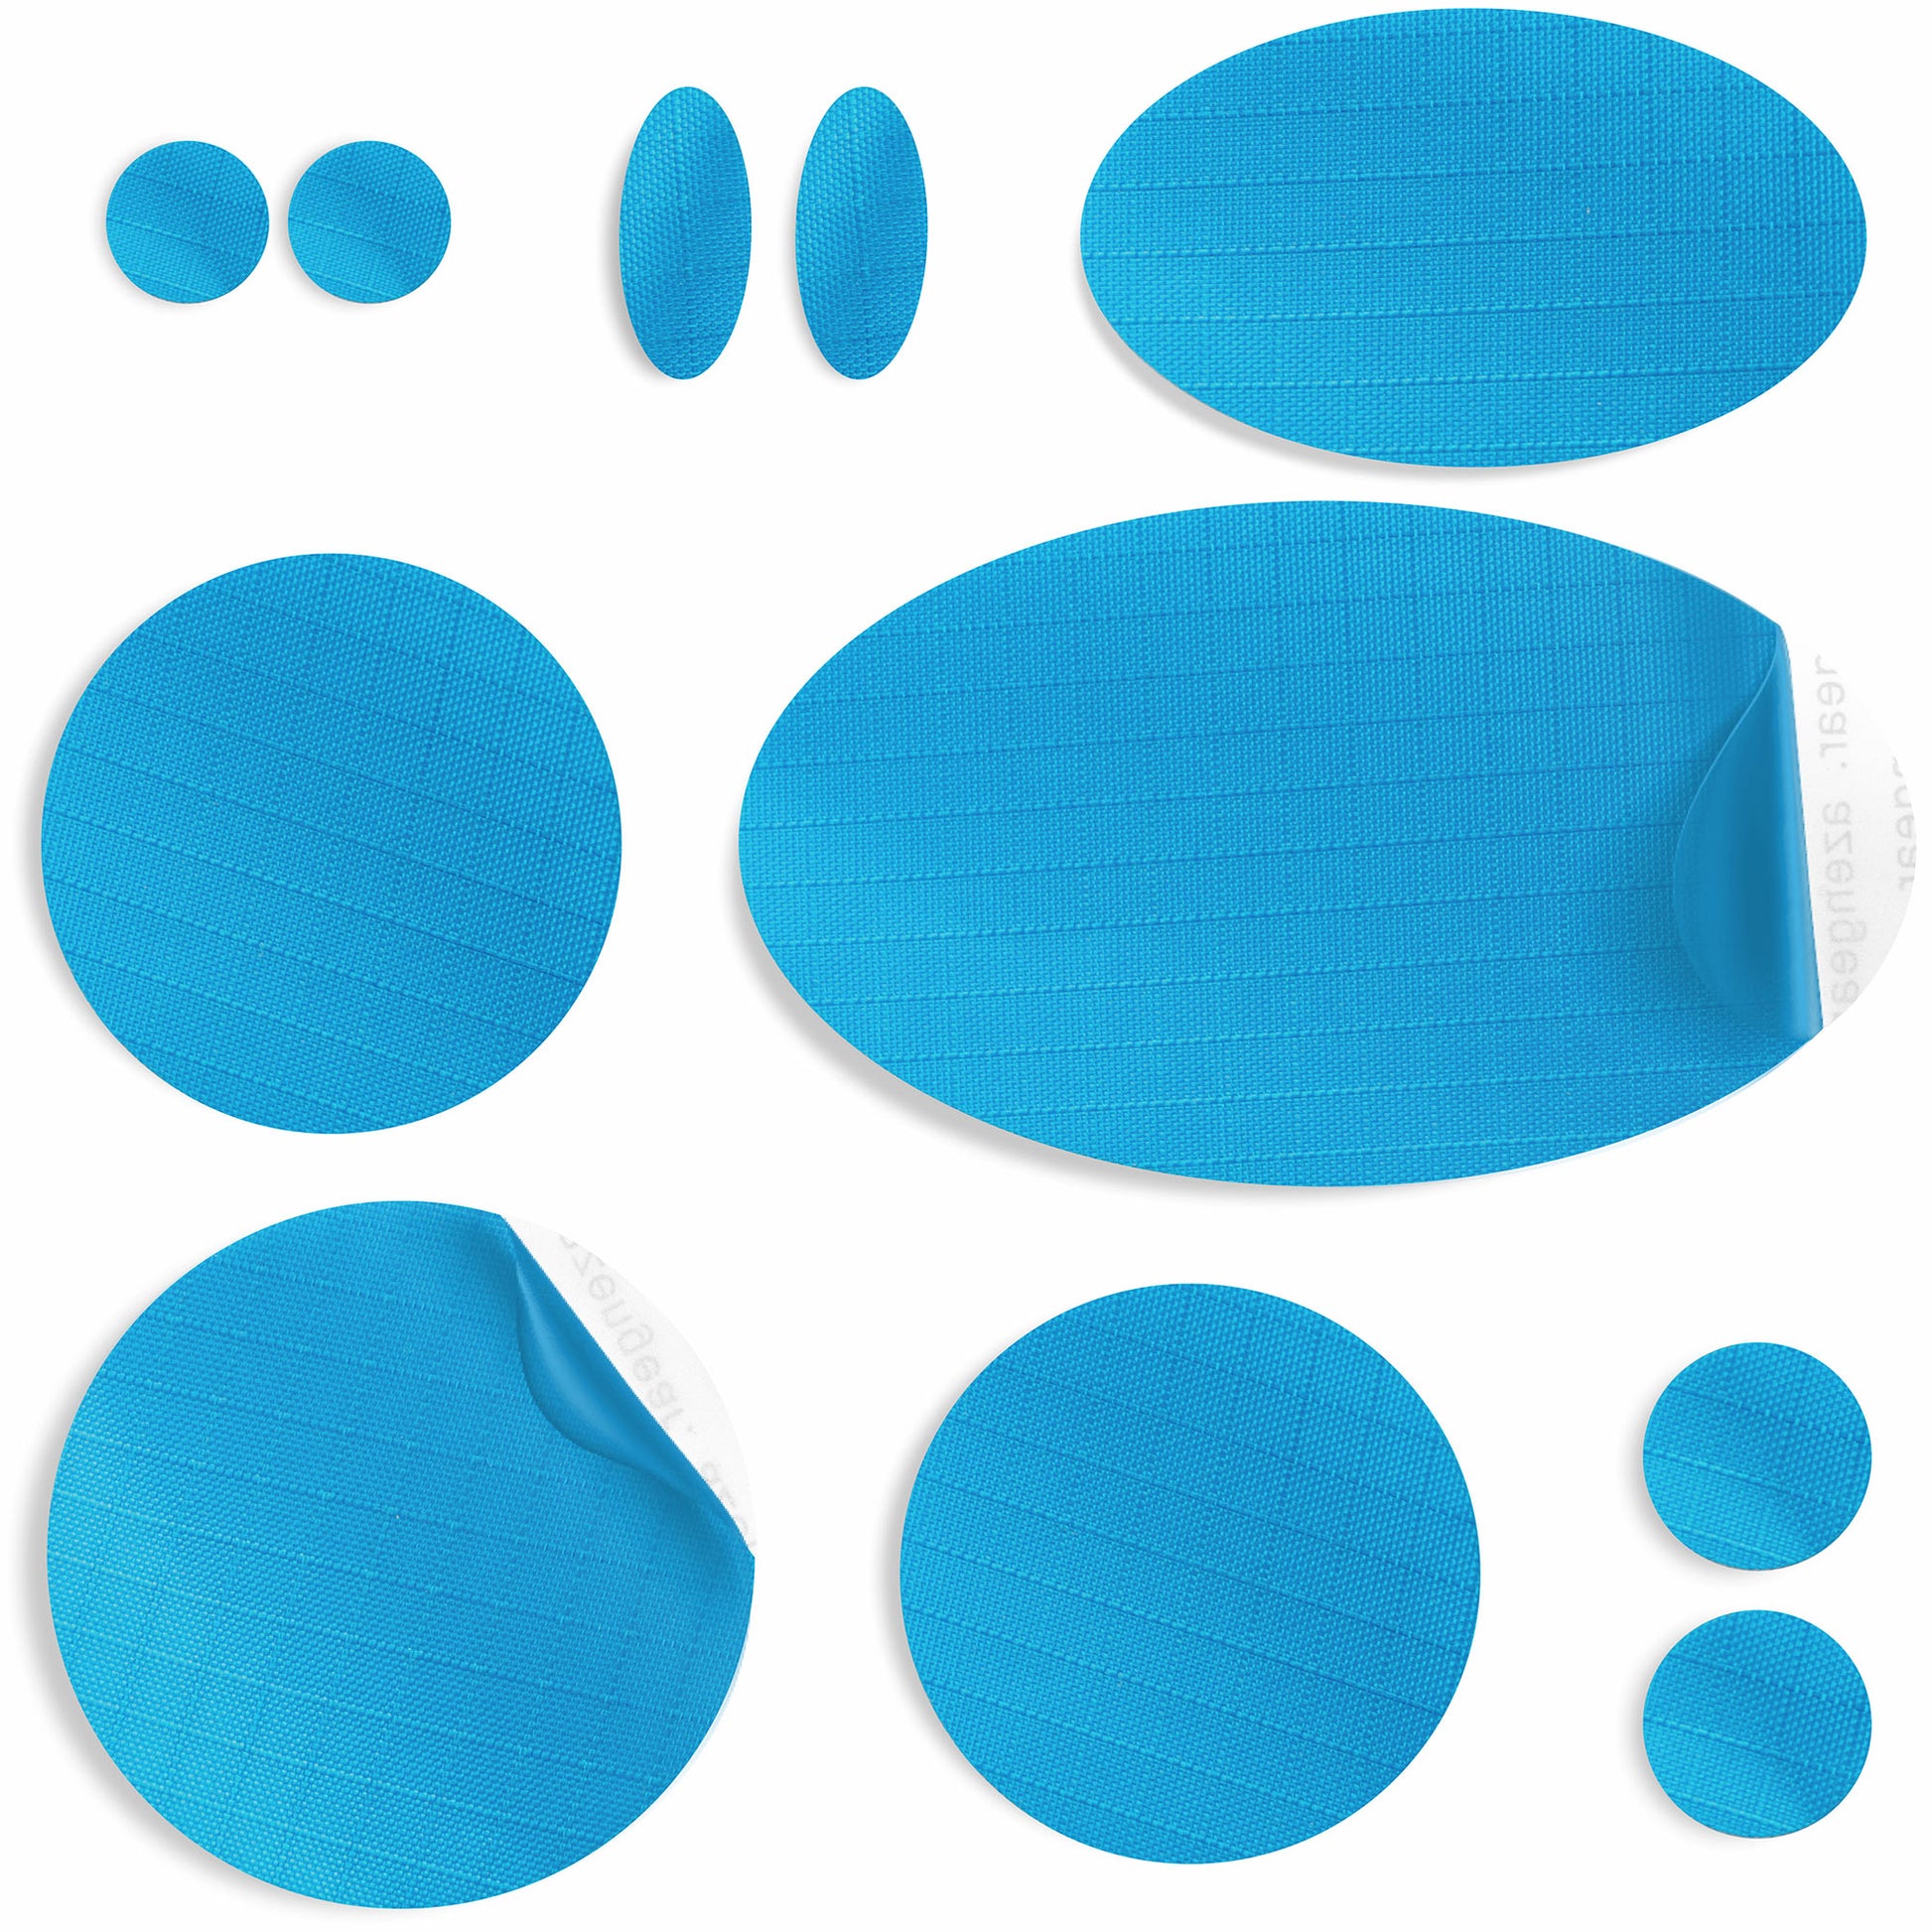 Turquoise Puffer Jacket Repair Patches | Waterproof, Pre-Cut, Self-Adhesive, Tear-Resistant (11 Pieces)